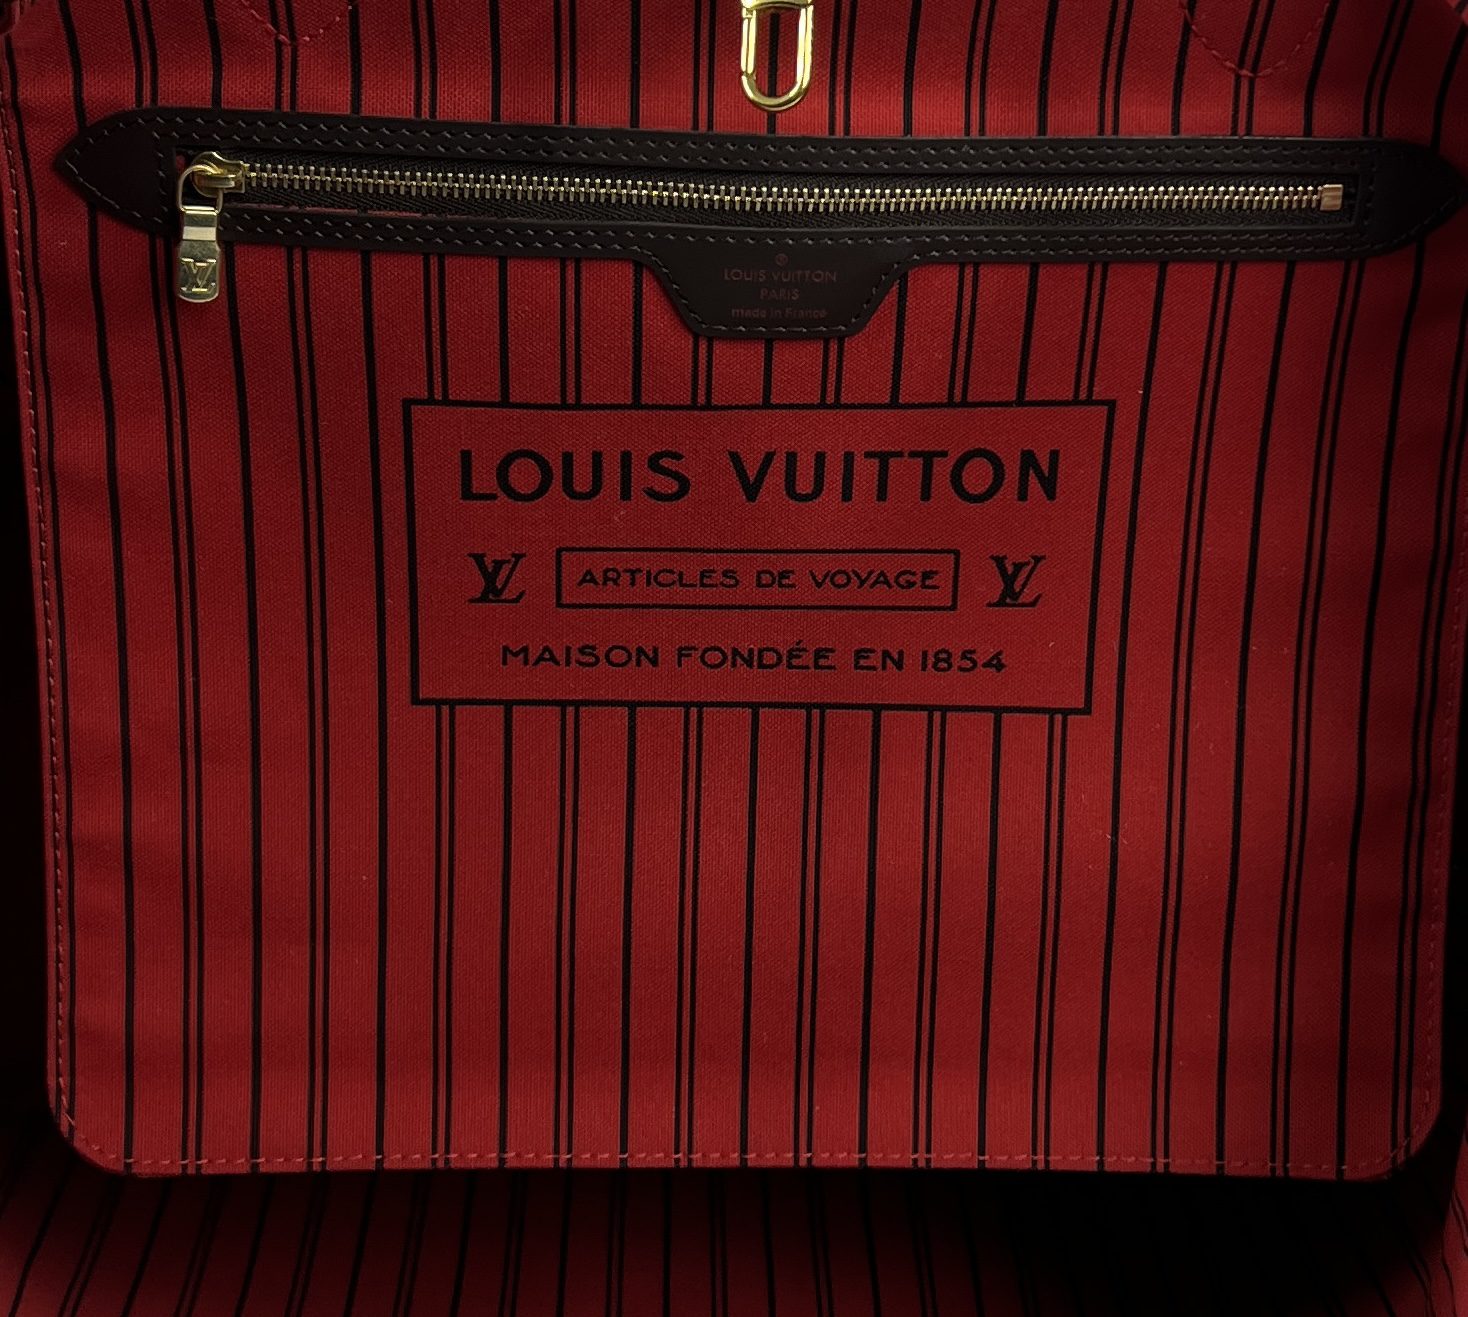 Louis Vuitton Neverfull GM Bag in Damier Ebène with Cherry Red